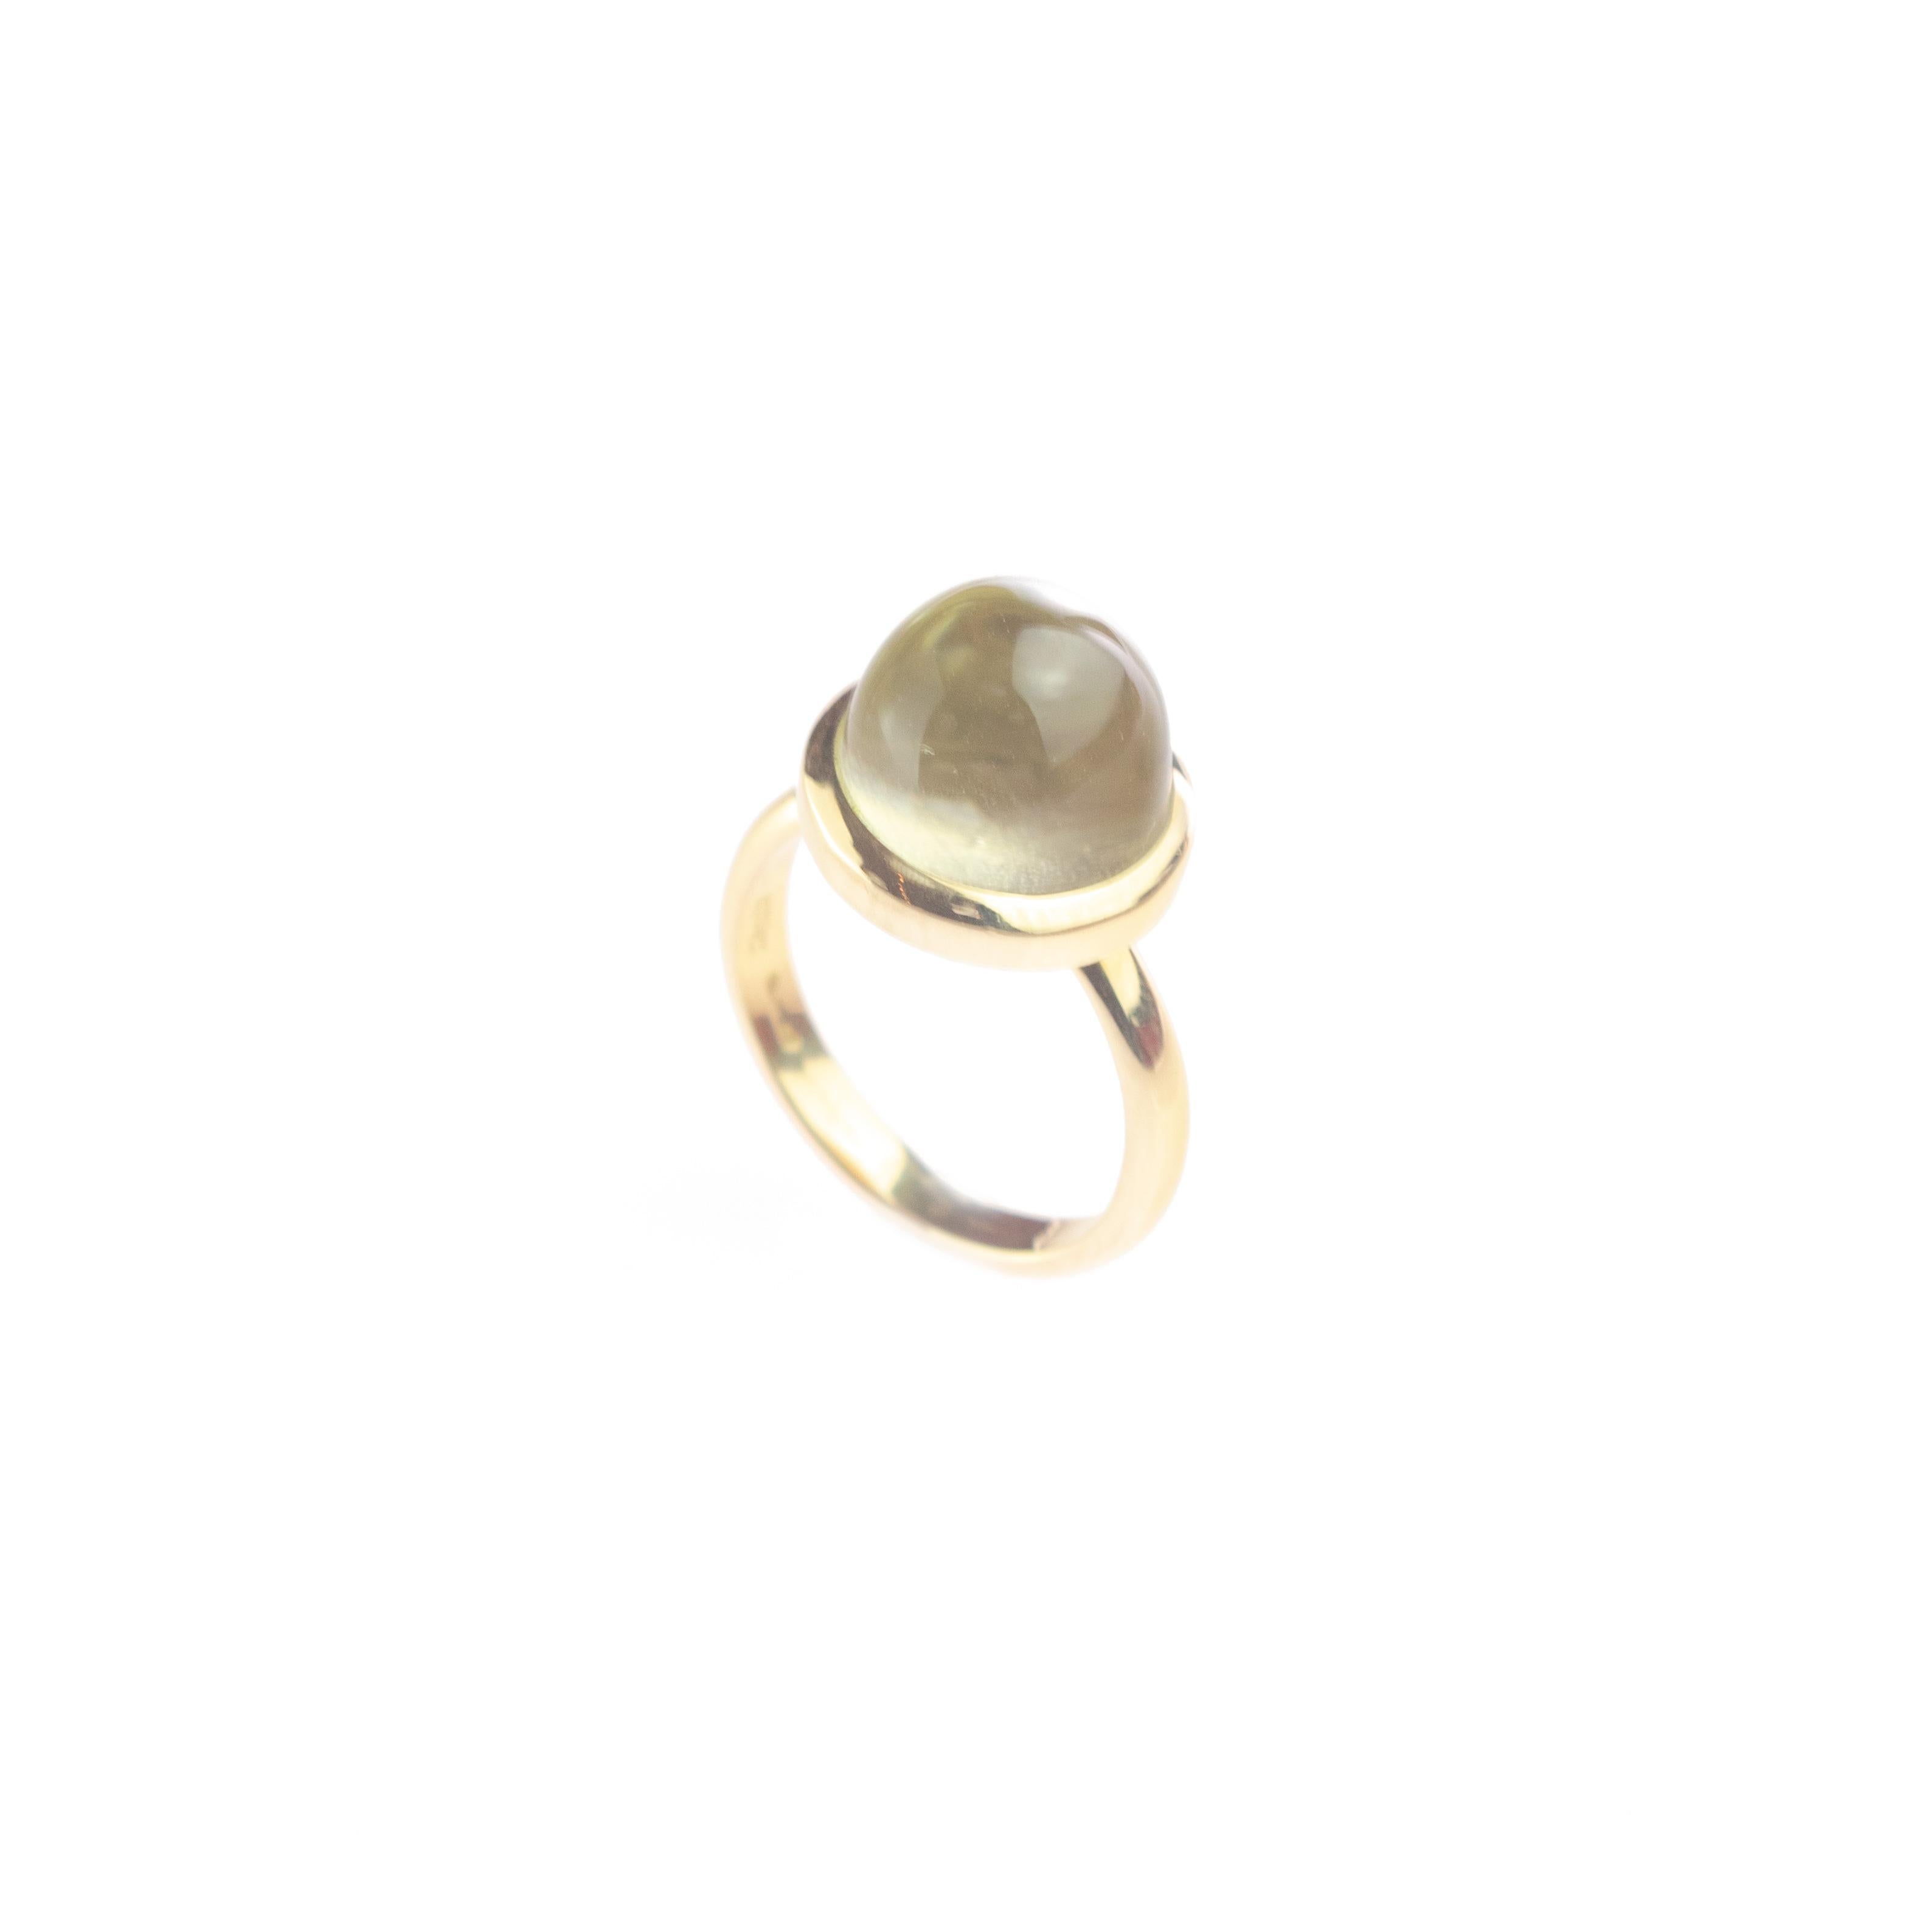 Round Cut Rock Crystal Sphere Stepped Cabochon 18 Karat Yellow Gold Artisan Cocktail Ring For Sale